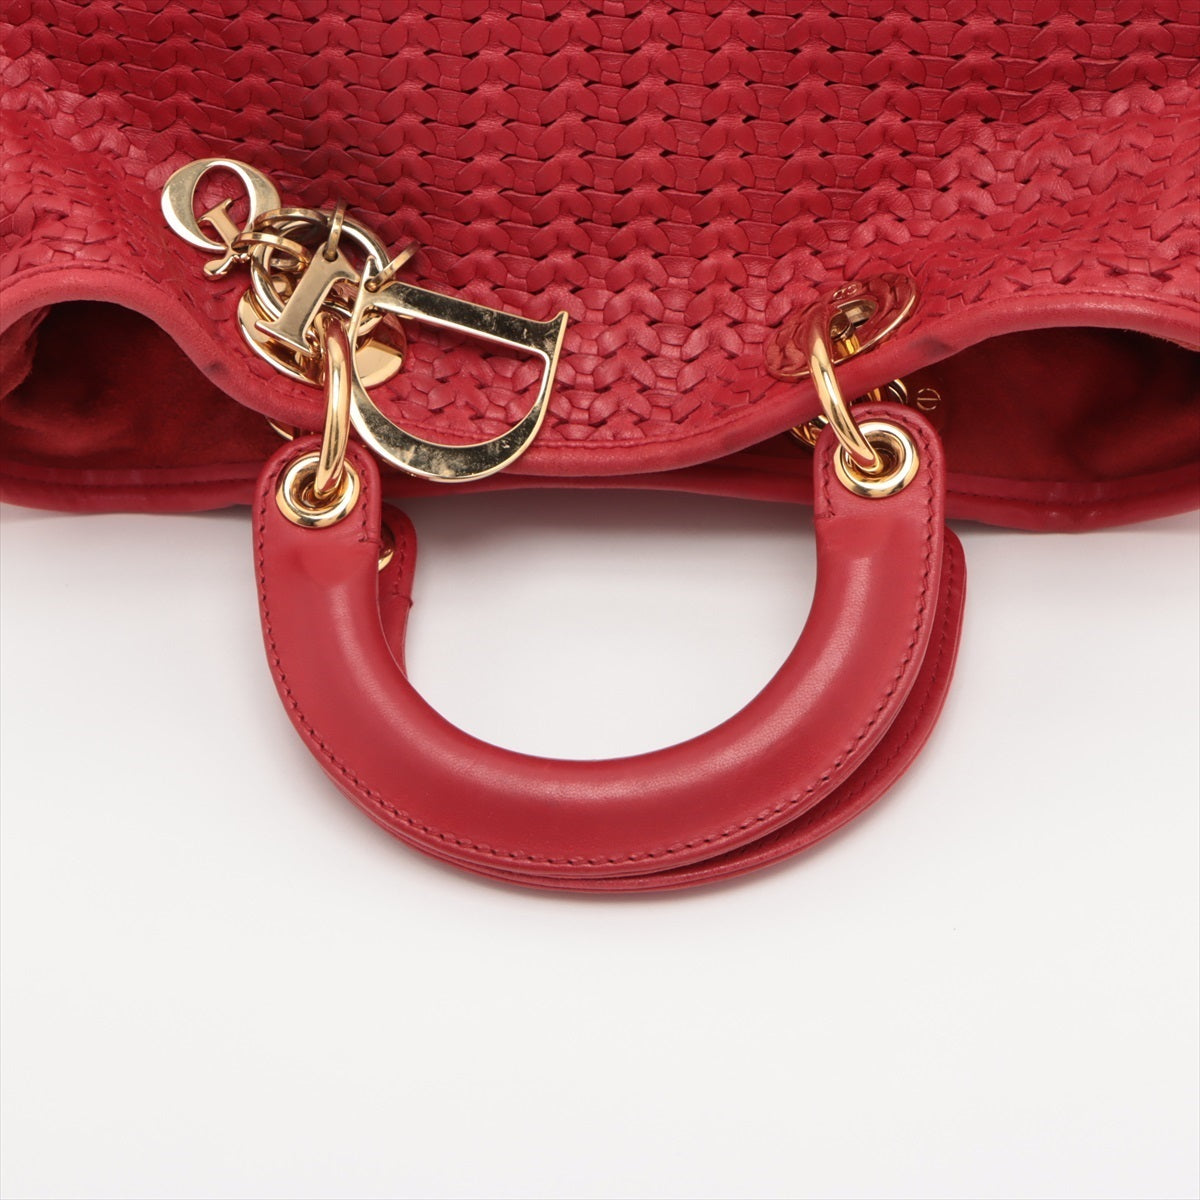 Christian Dior Leather Hand bag Red